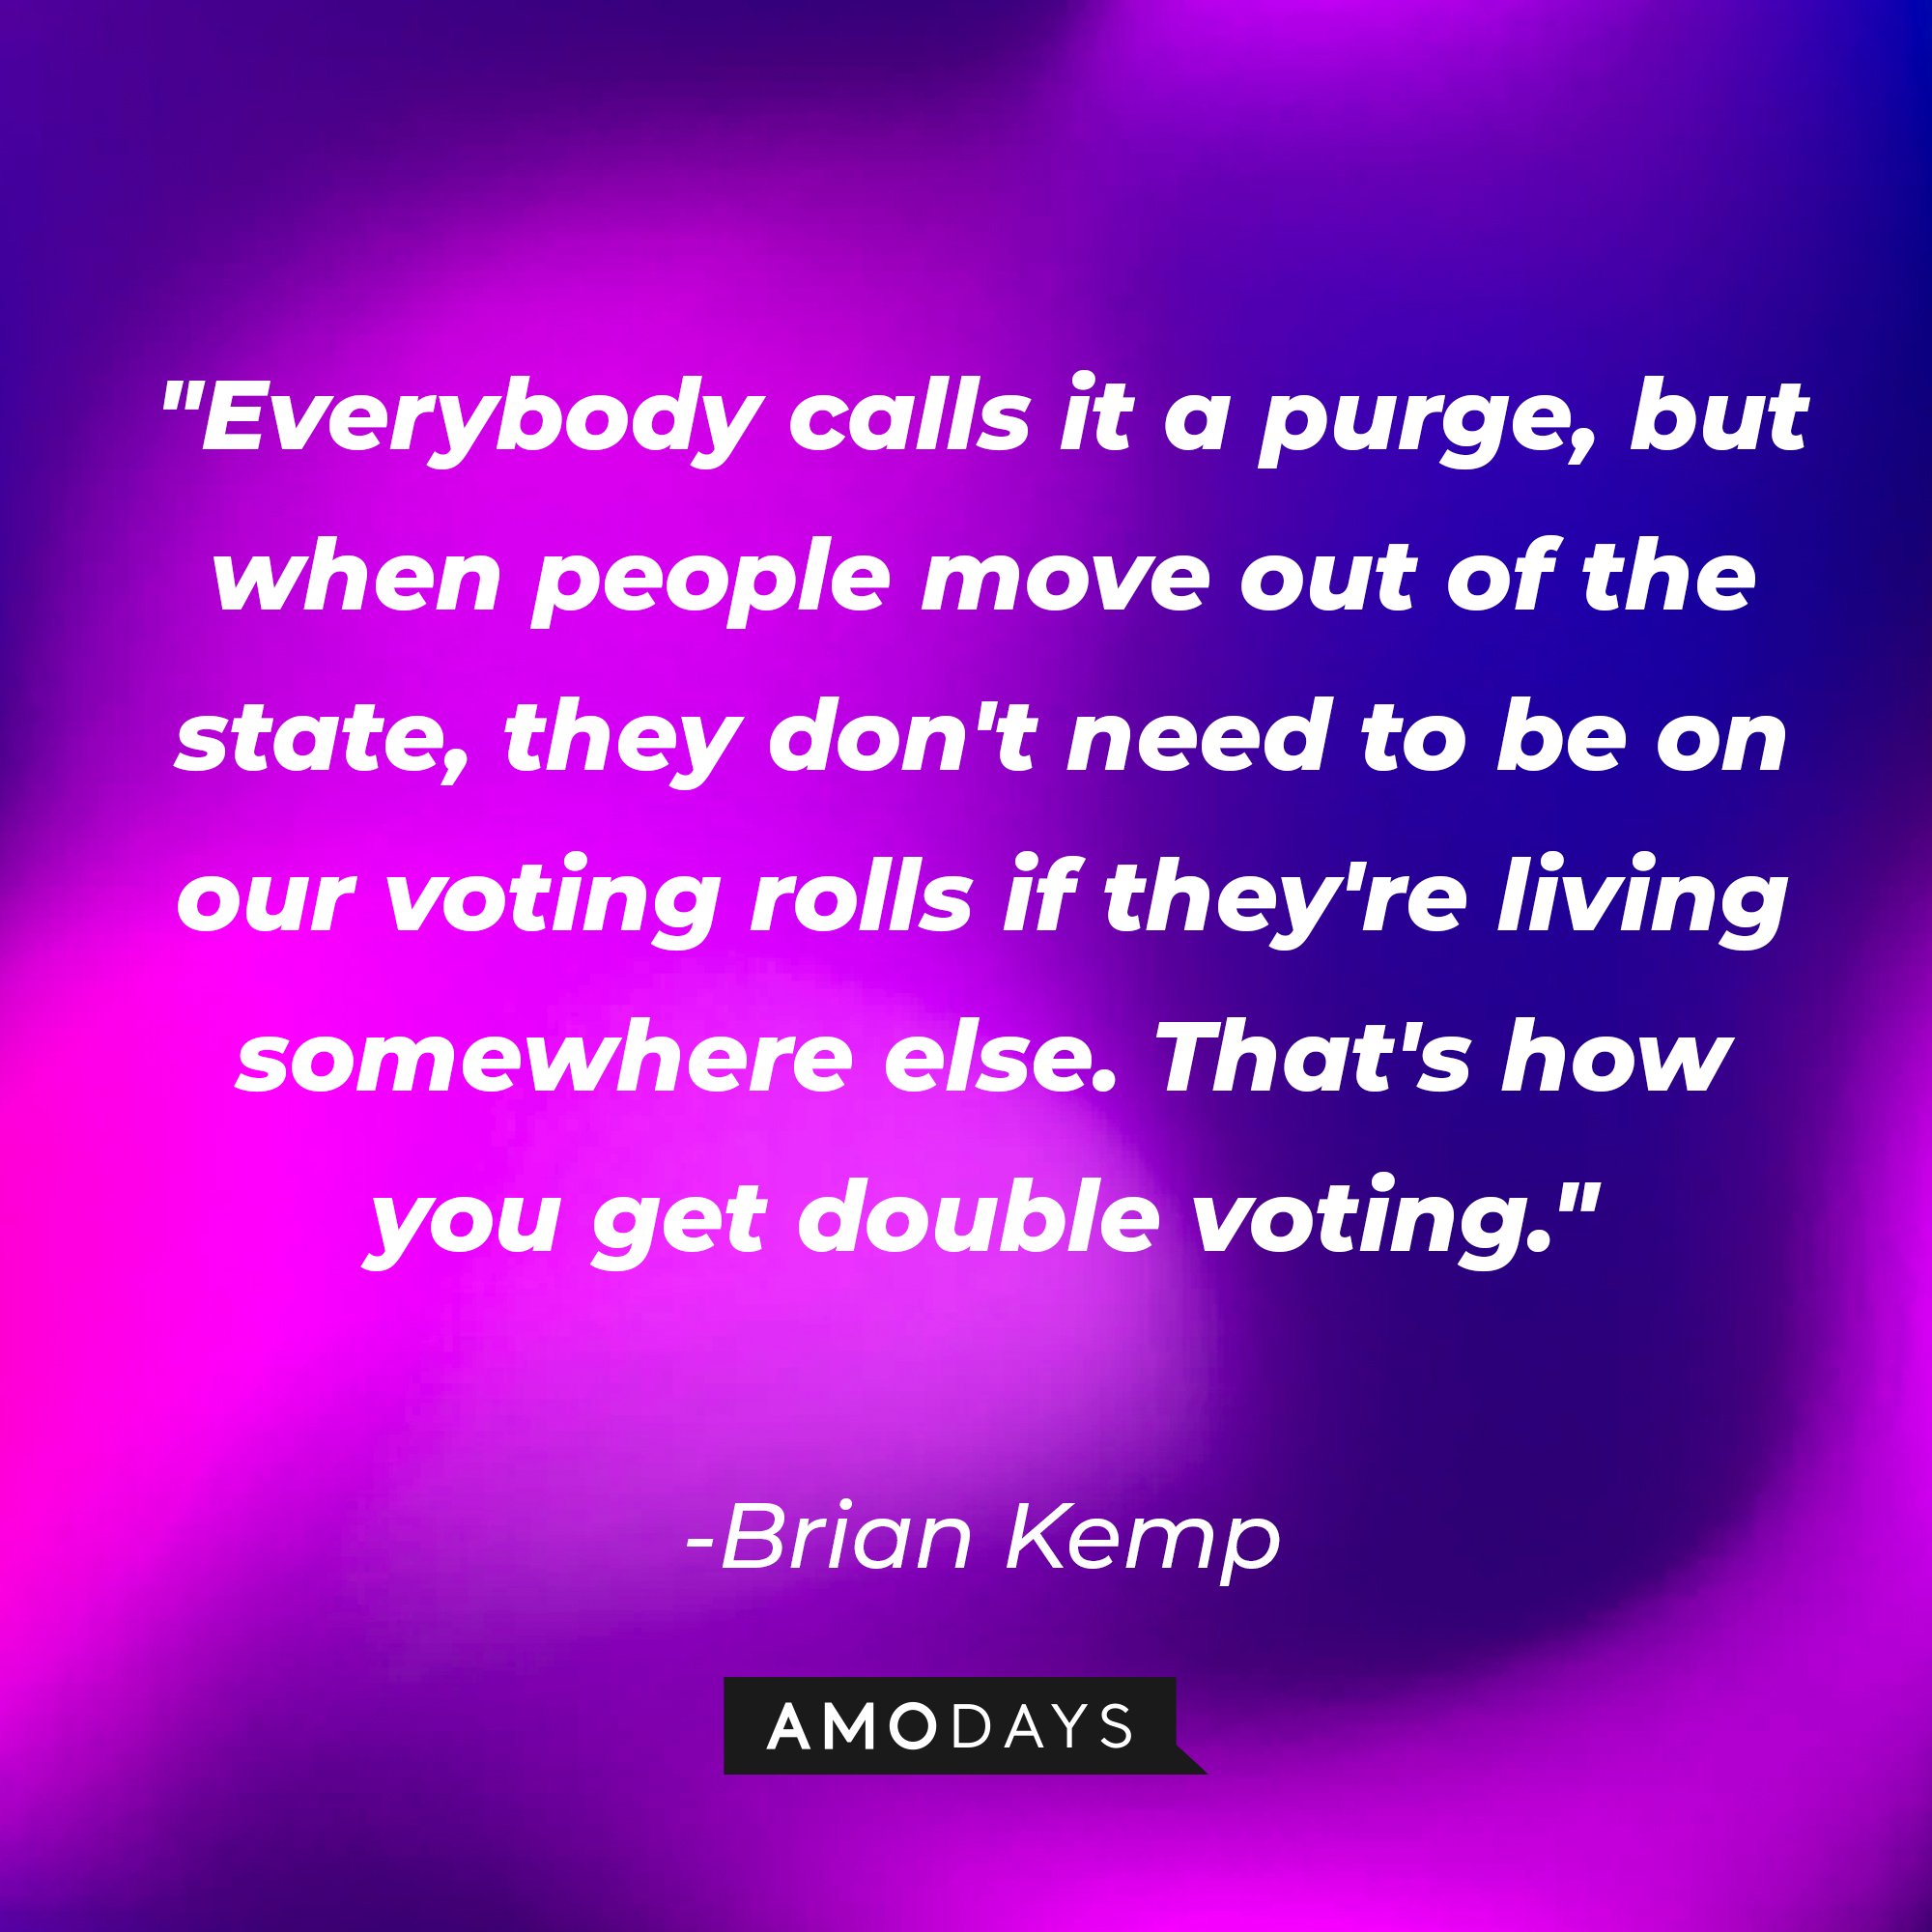 Brian Kemp’s quote: "Everybody calls it a purge, but when people move out of the state, they don't need to be on our voting rolls if they're living somewhere else. That's how you get double voting." | Image: AmoDays   